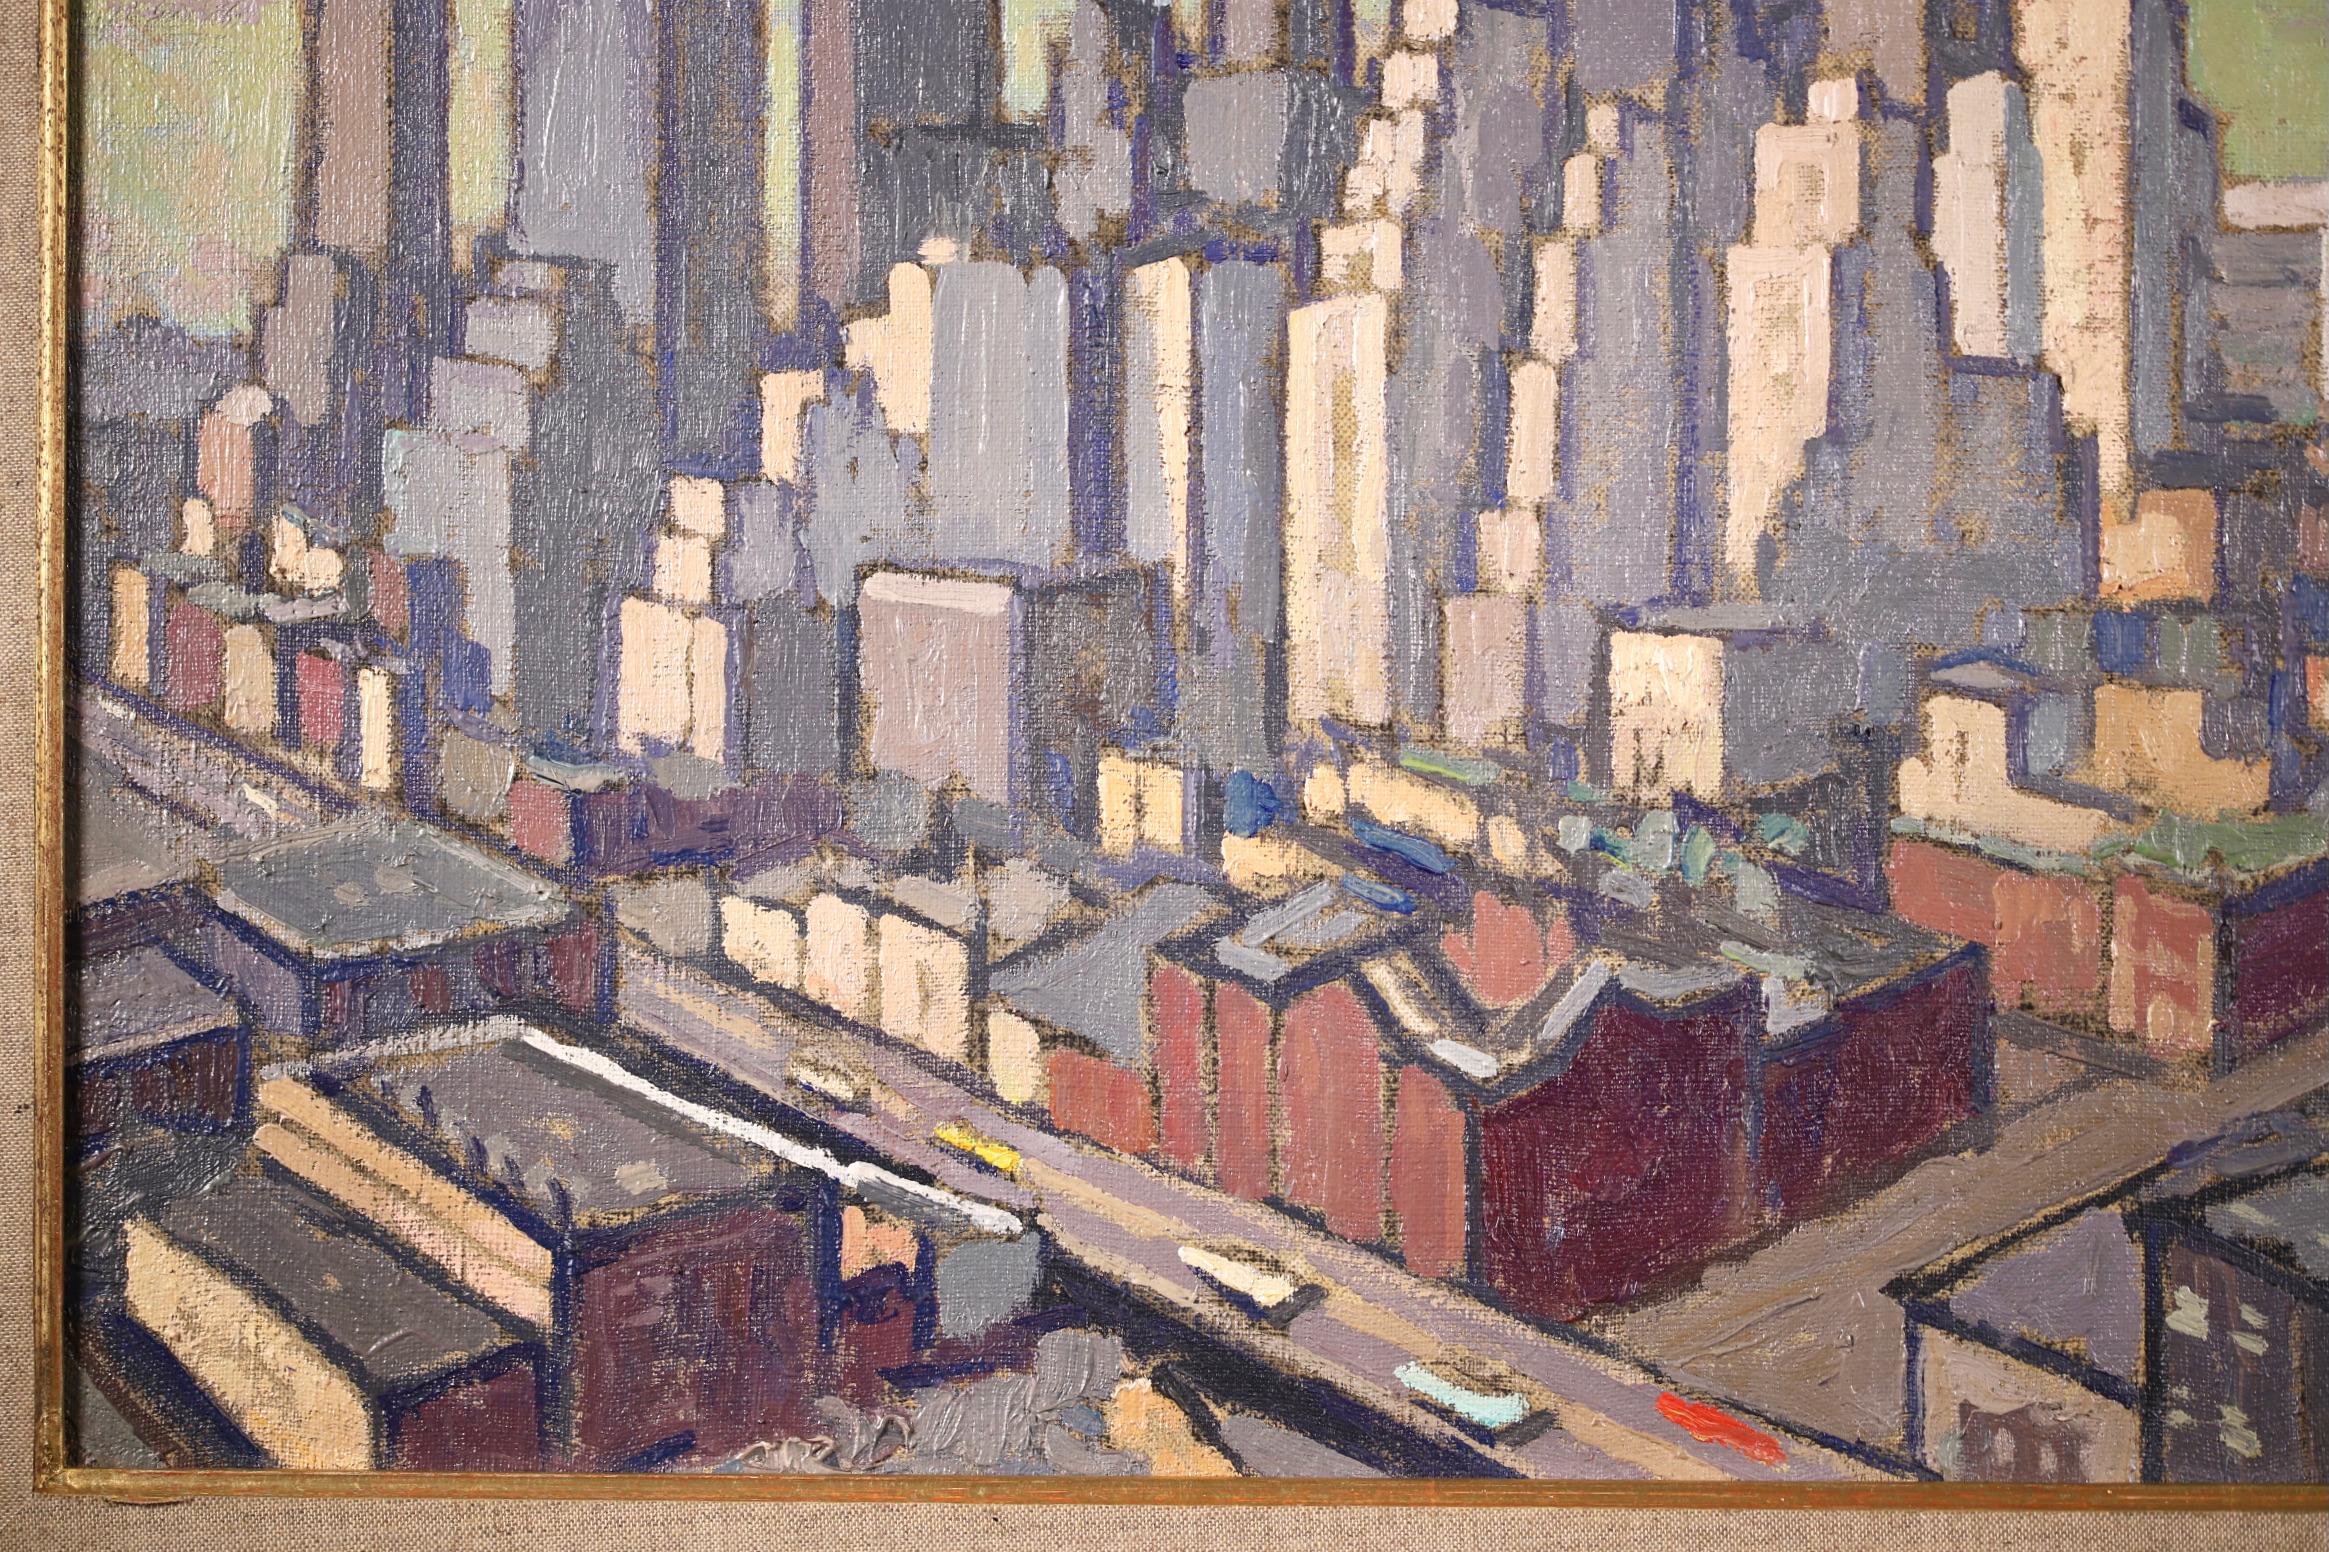 View of New York - Post Impressionist Oil, Cityscape by Jacques Martin-Ferrieres - Post-Impressionist Painting by Jacques Martin-Ferrières